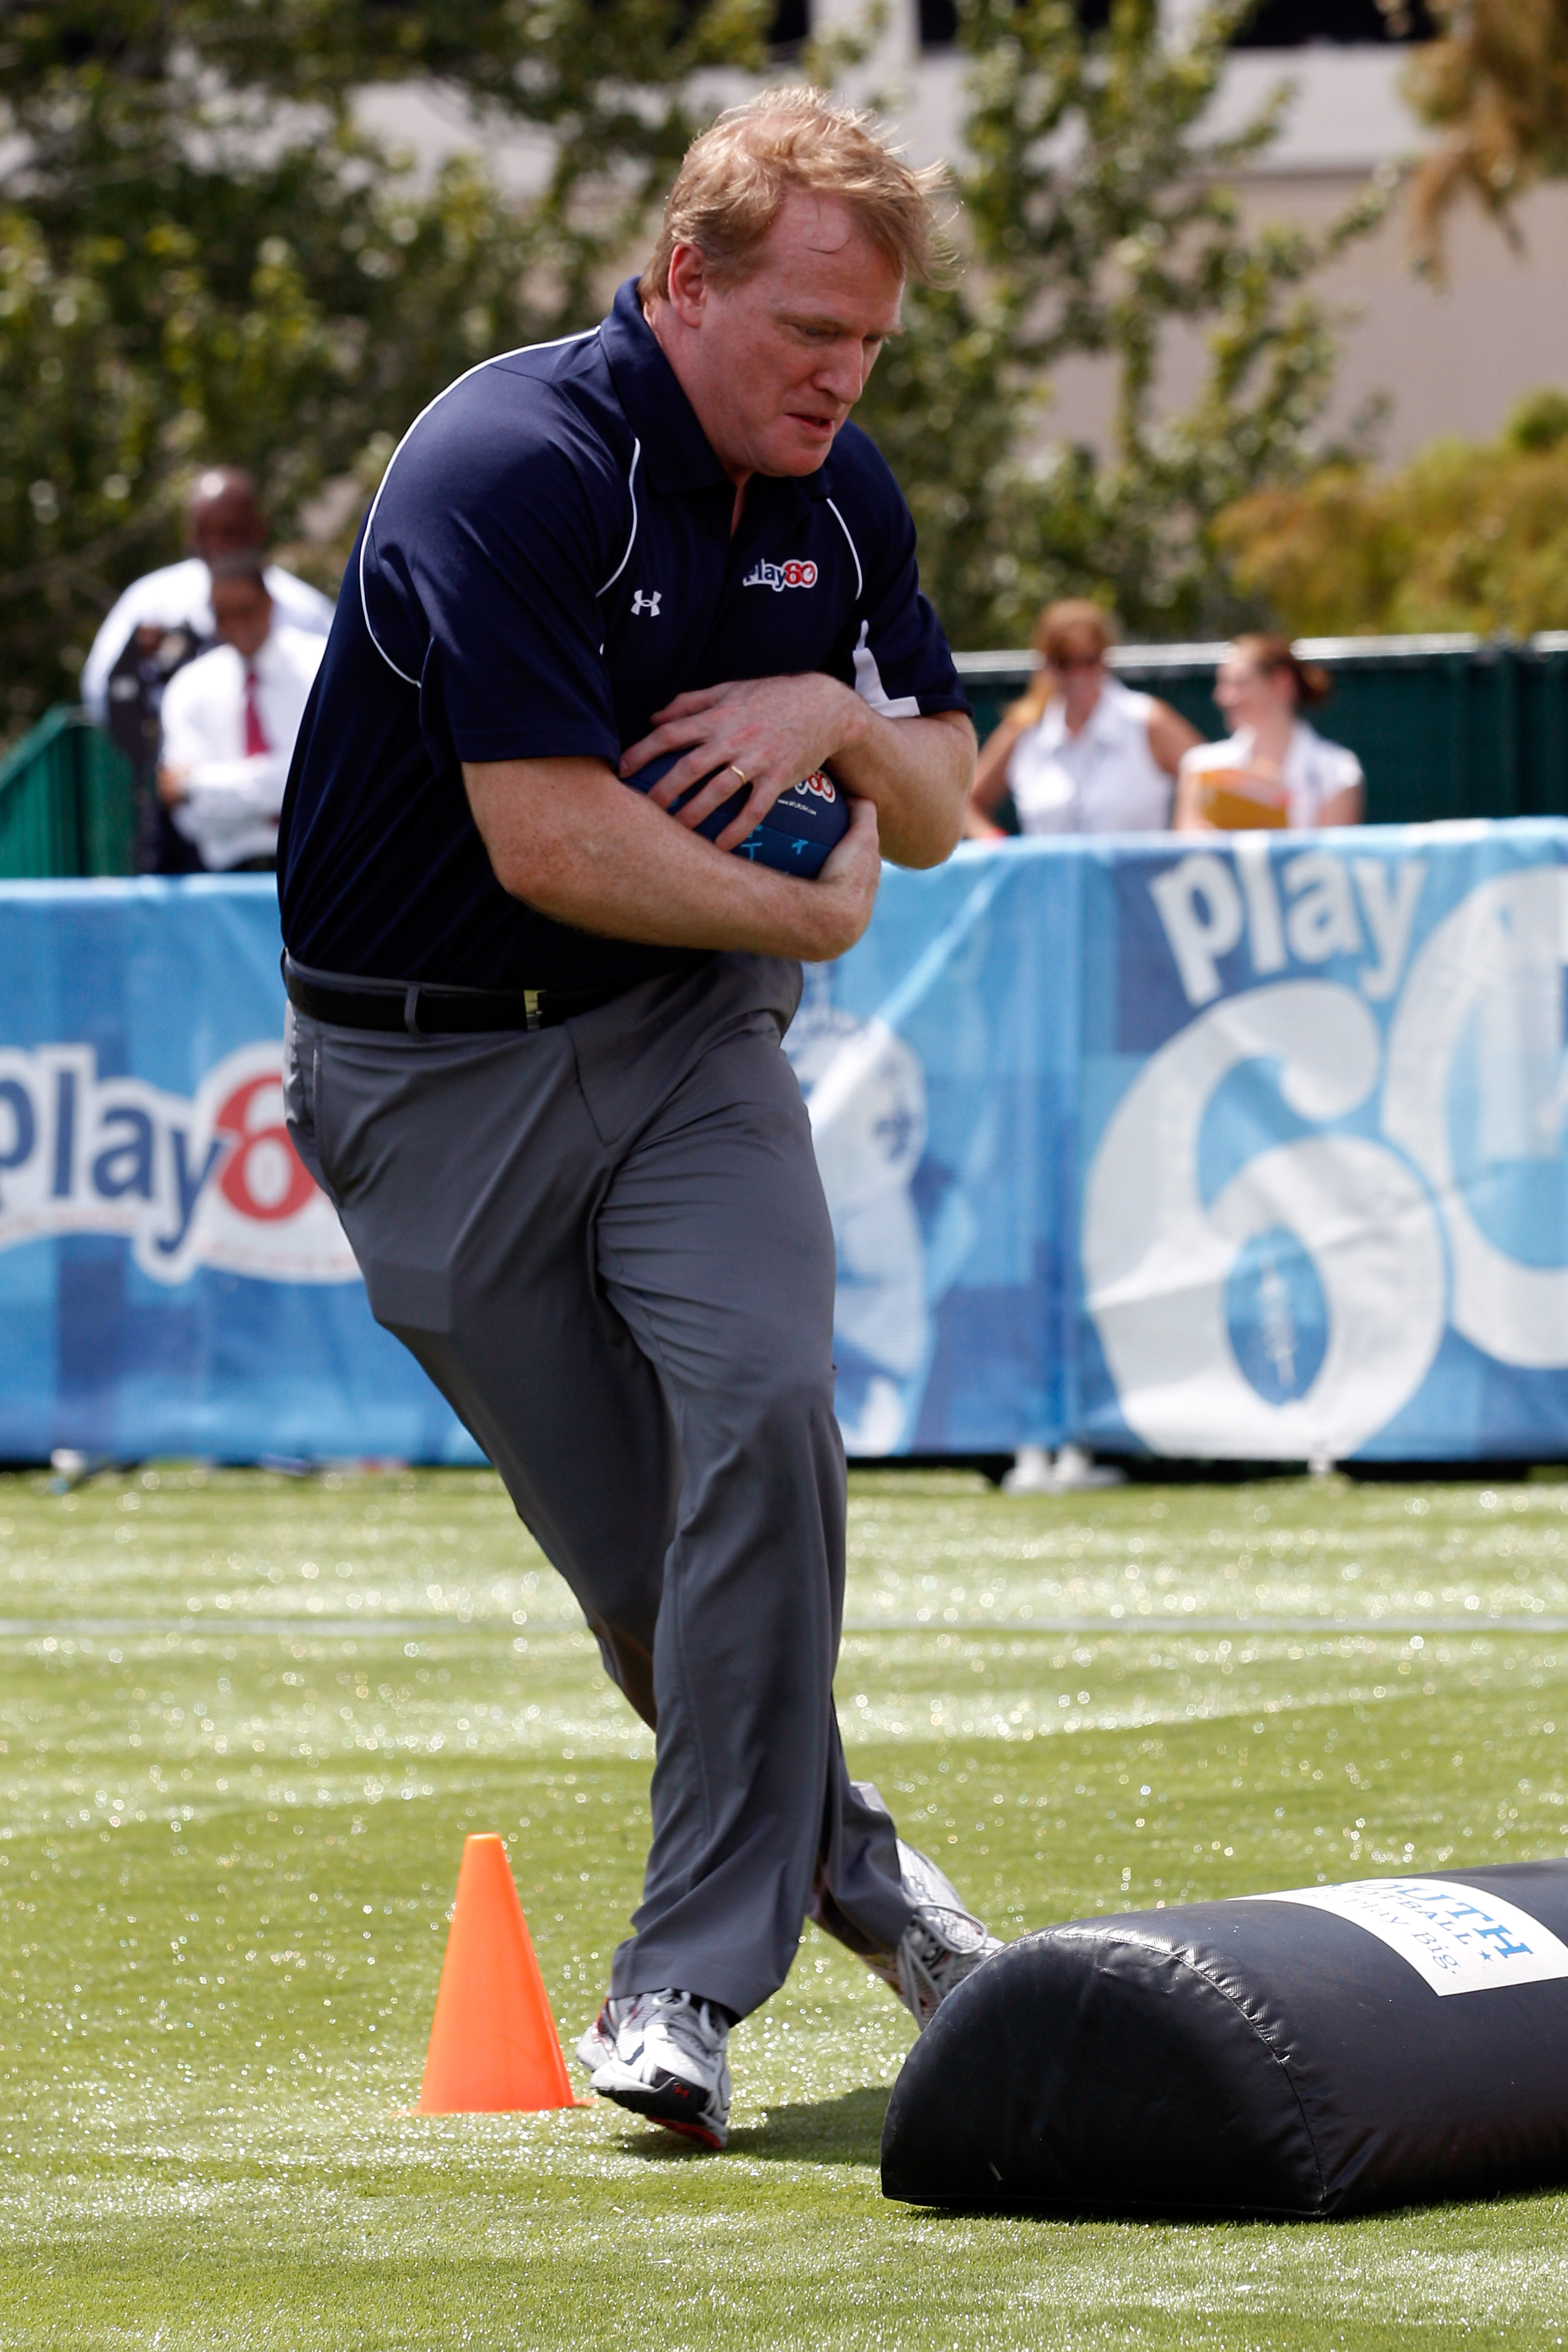 NEW ORLEANS - SEPTEMBER 08:  NFL commissioner Roger Goodell  plays on the field during the NFL�s Play 60 campaign to fight childhood obesity at Brock Elementary School September 8, 2010 in New Orleans, Louisiana. Obama joined NFL Commissioner Roger Goodel